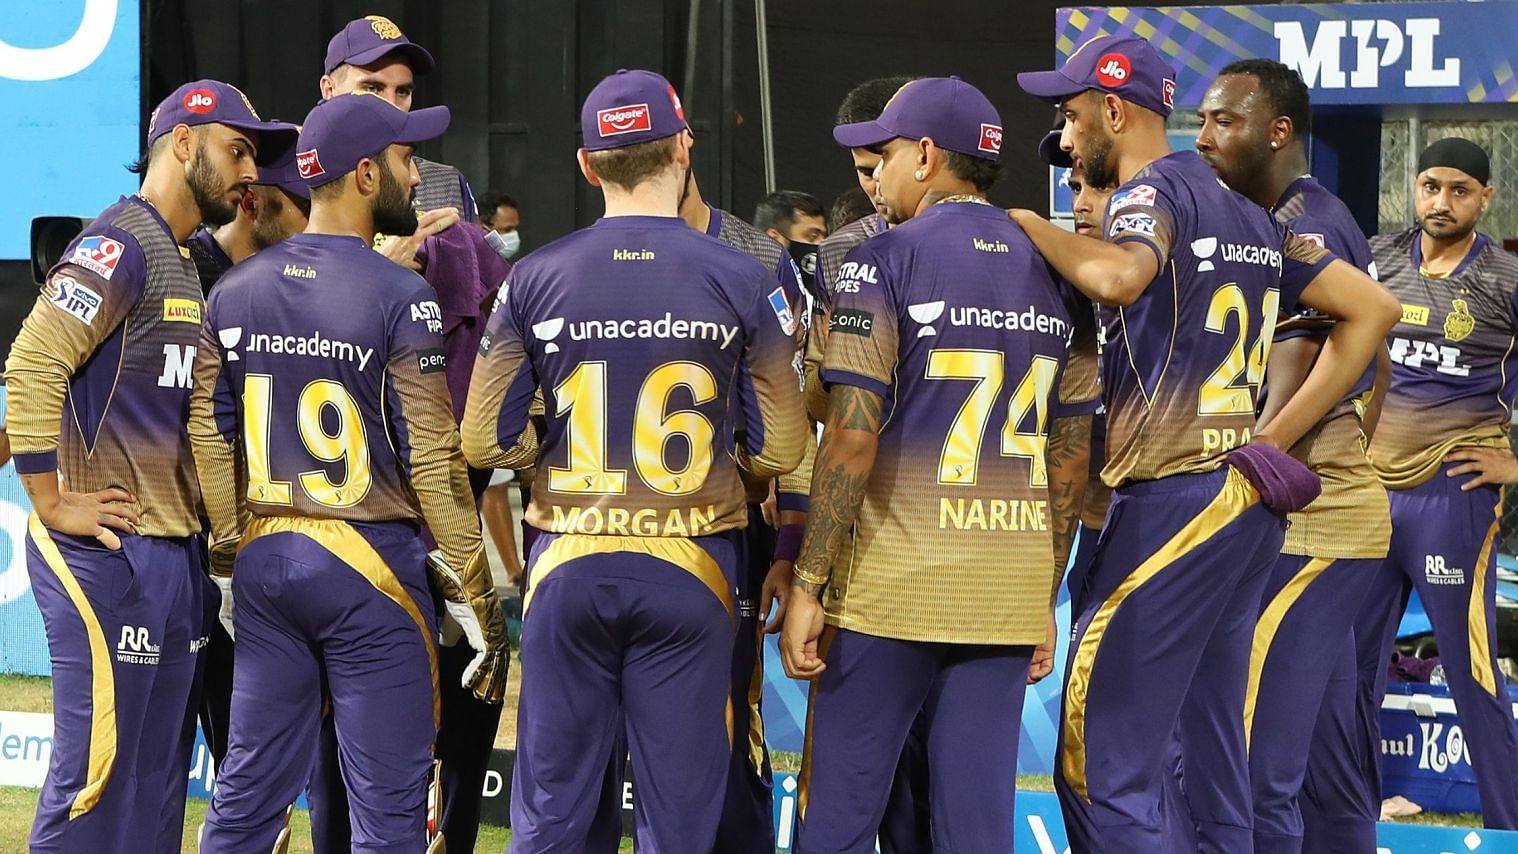 Monday night’s IPL match between KKR and RCB has been rescheduled after 2 KKR players tested positive for COVID-19.